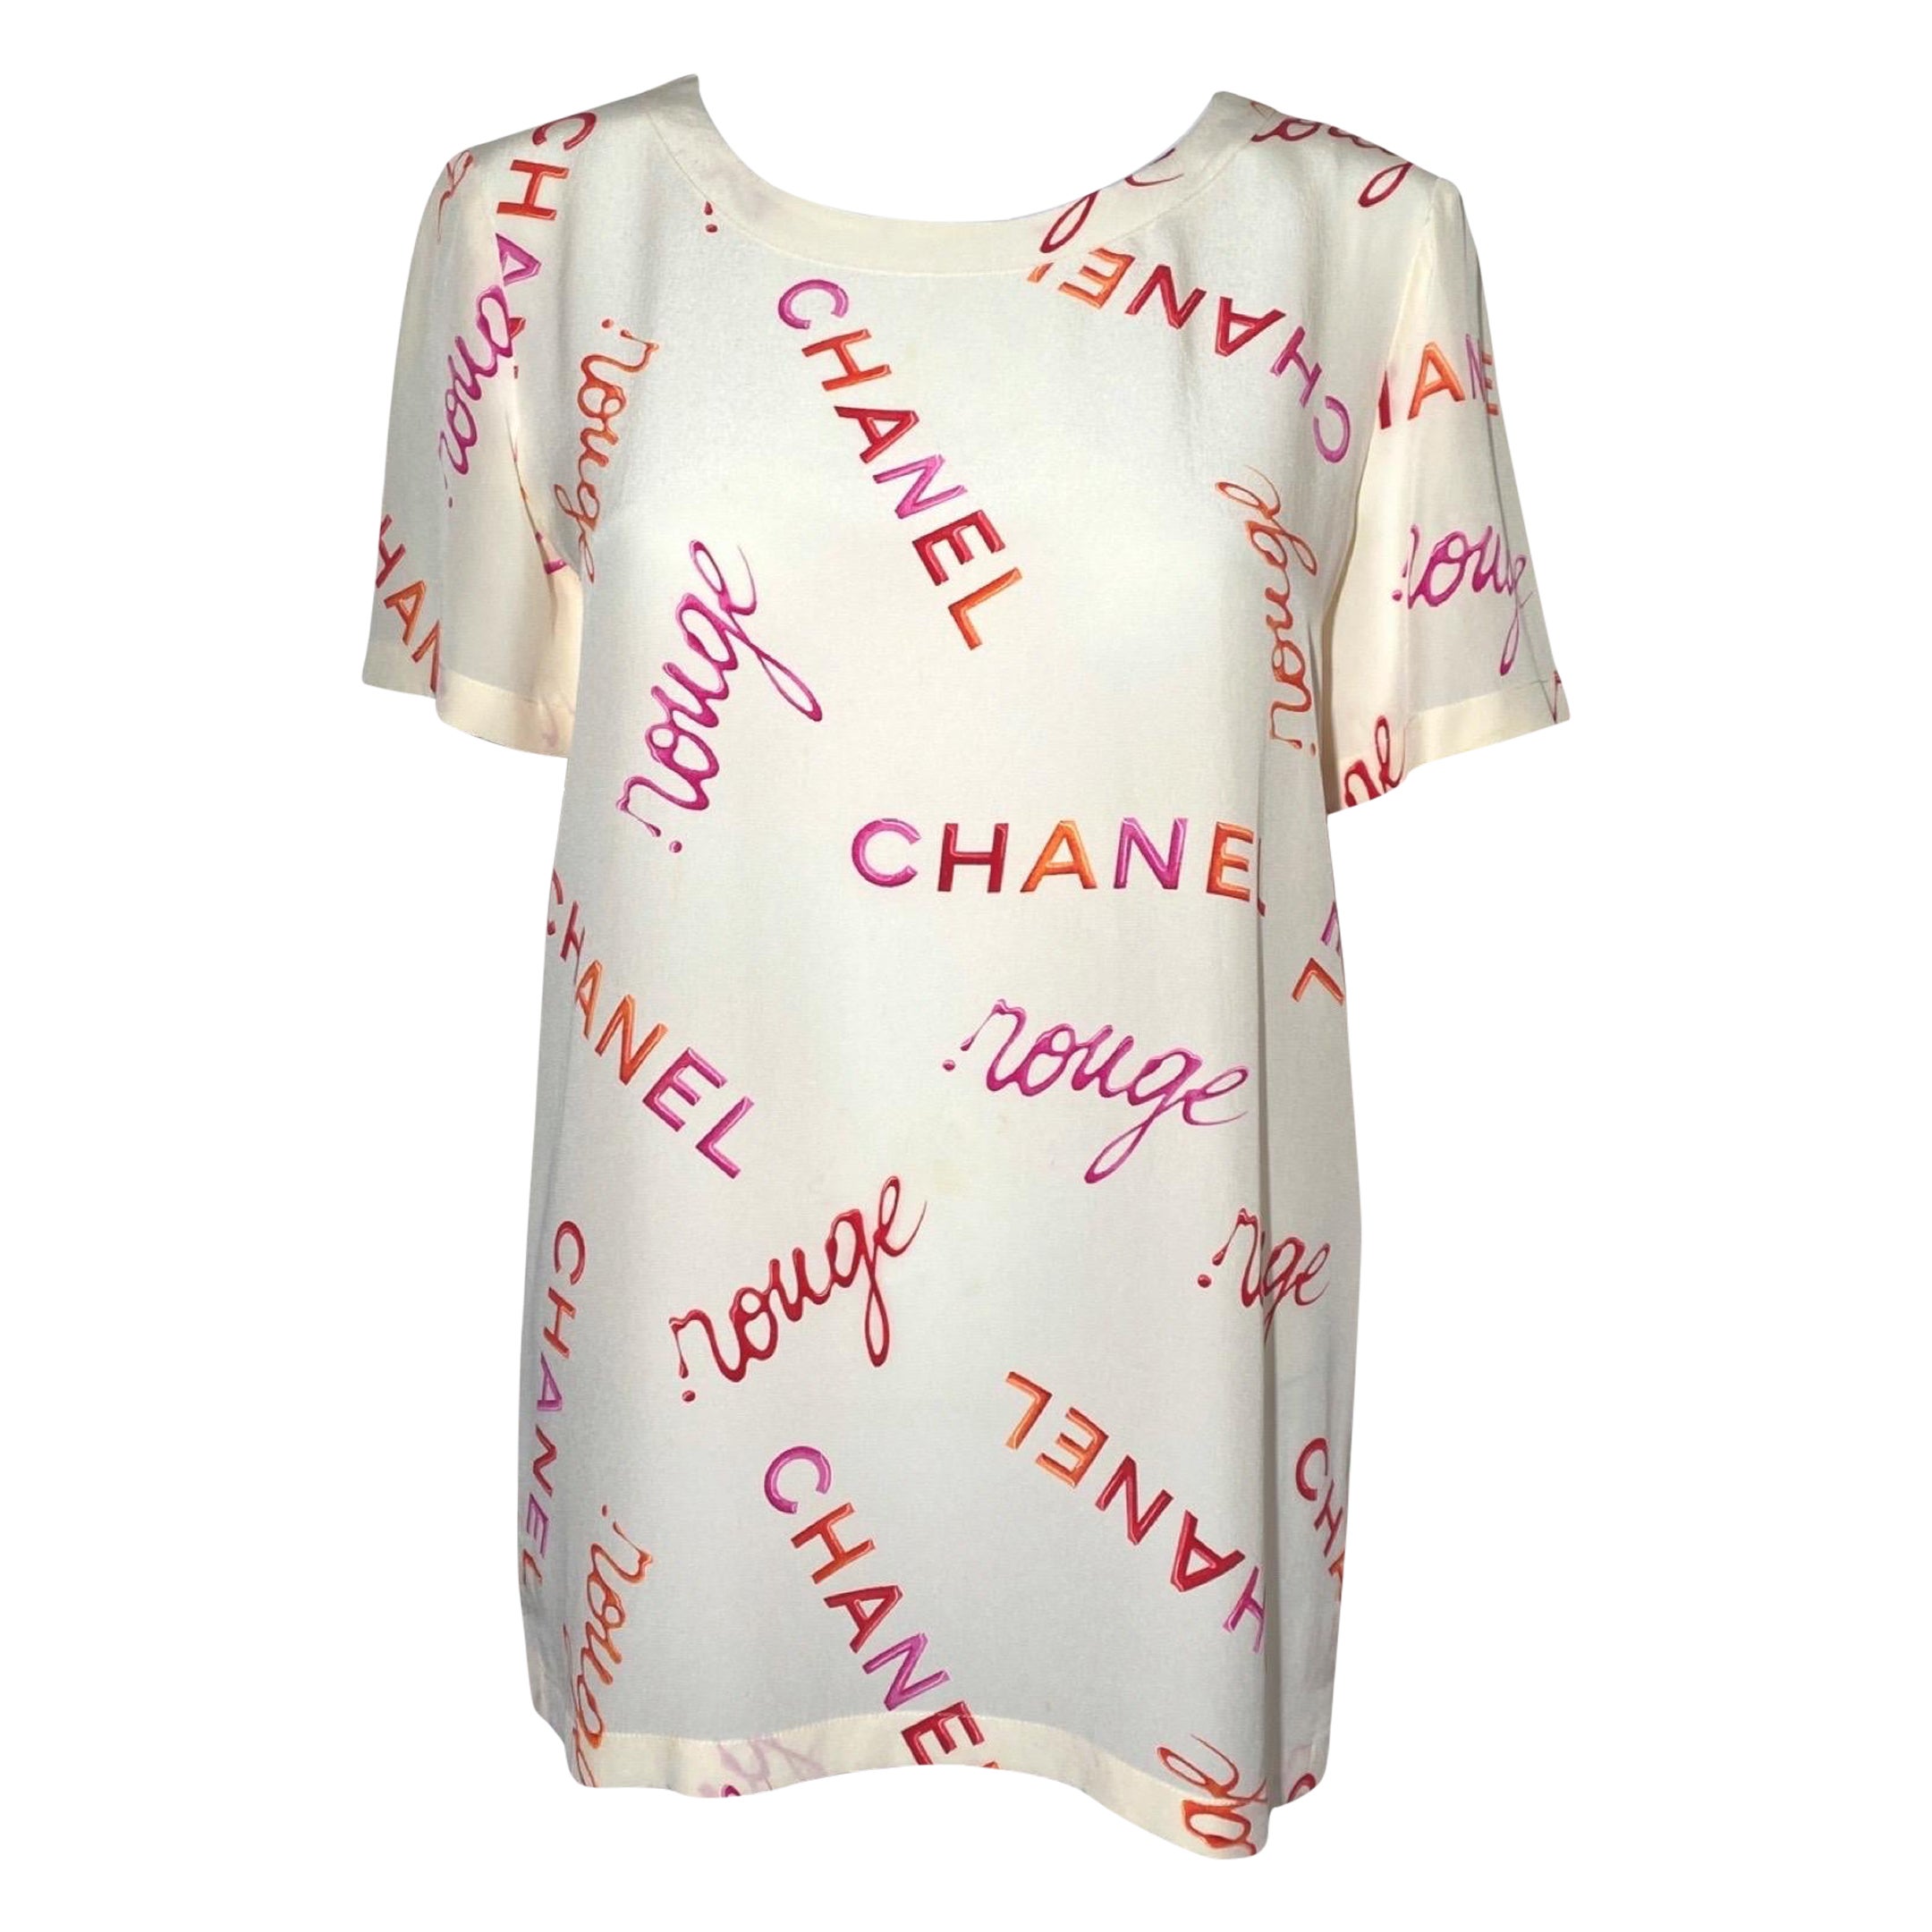 CHANEL COCO MADEMOISELLE Graphic T-shirt 38 White Auth Women Used from Japan